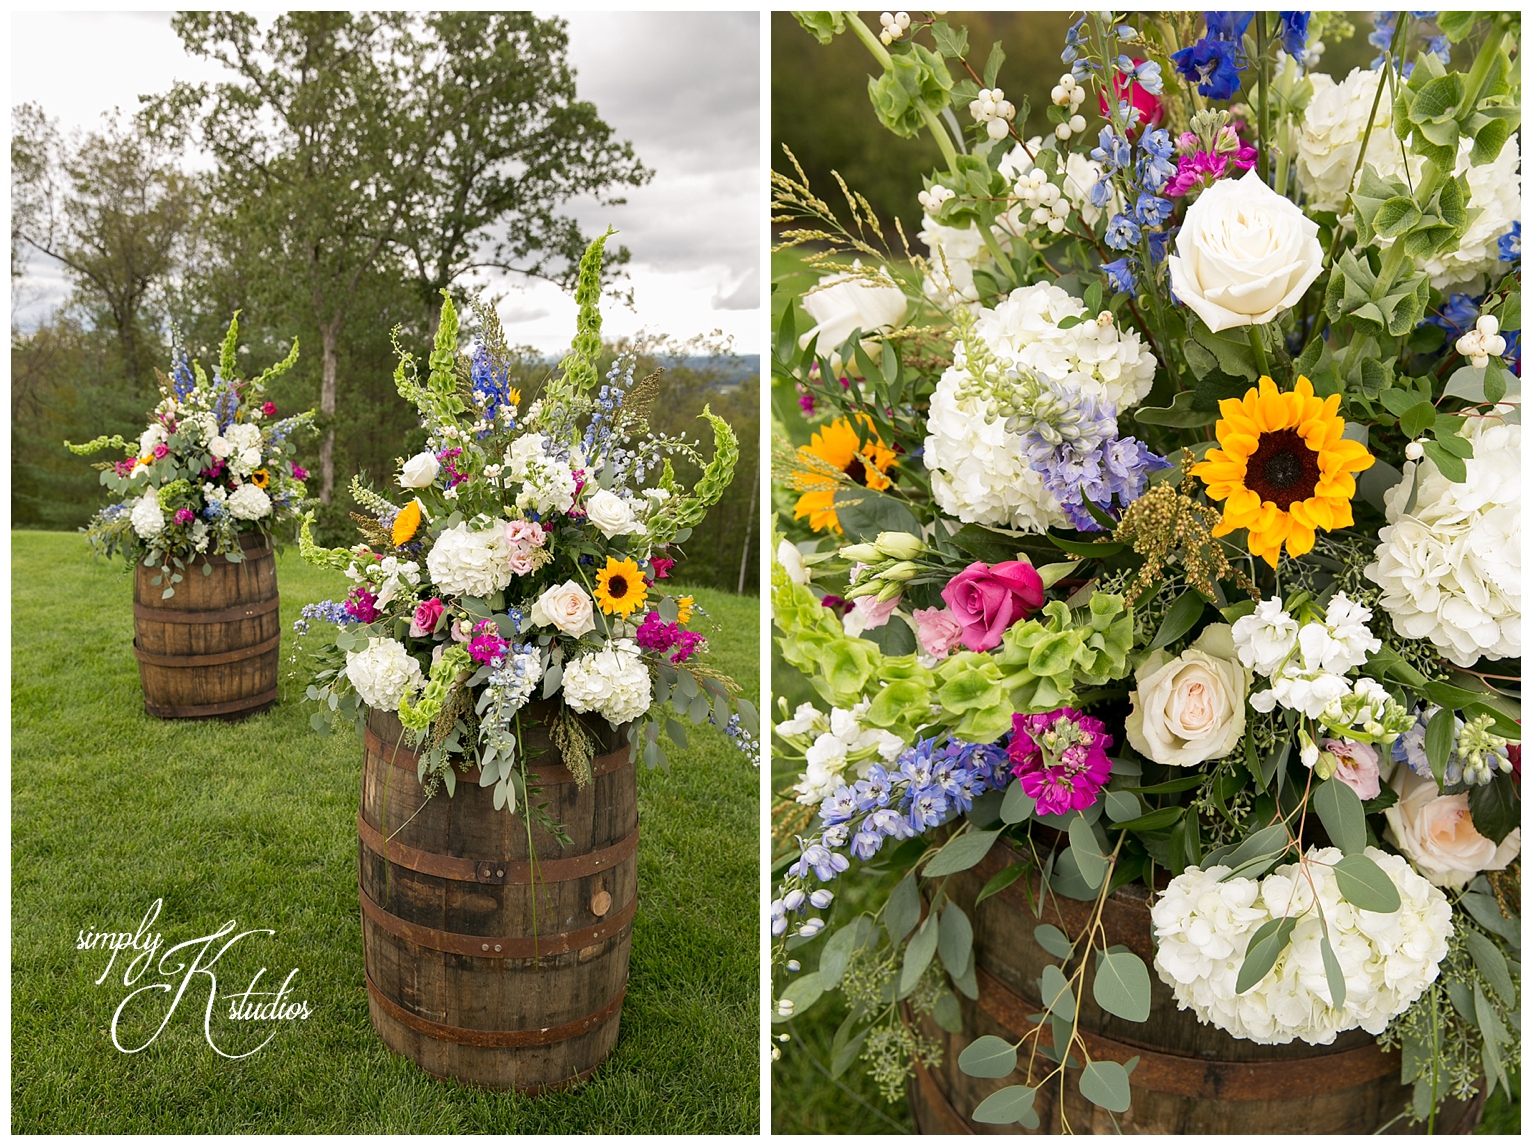 The Floral District Wedding Flowers.jpg